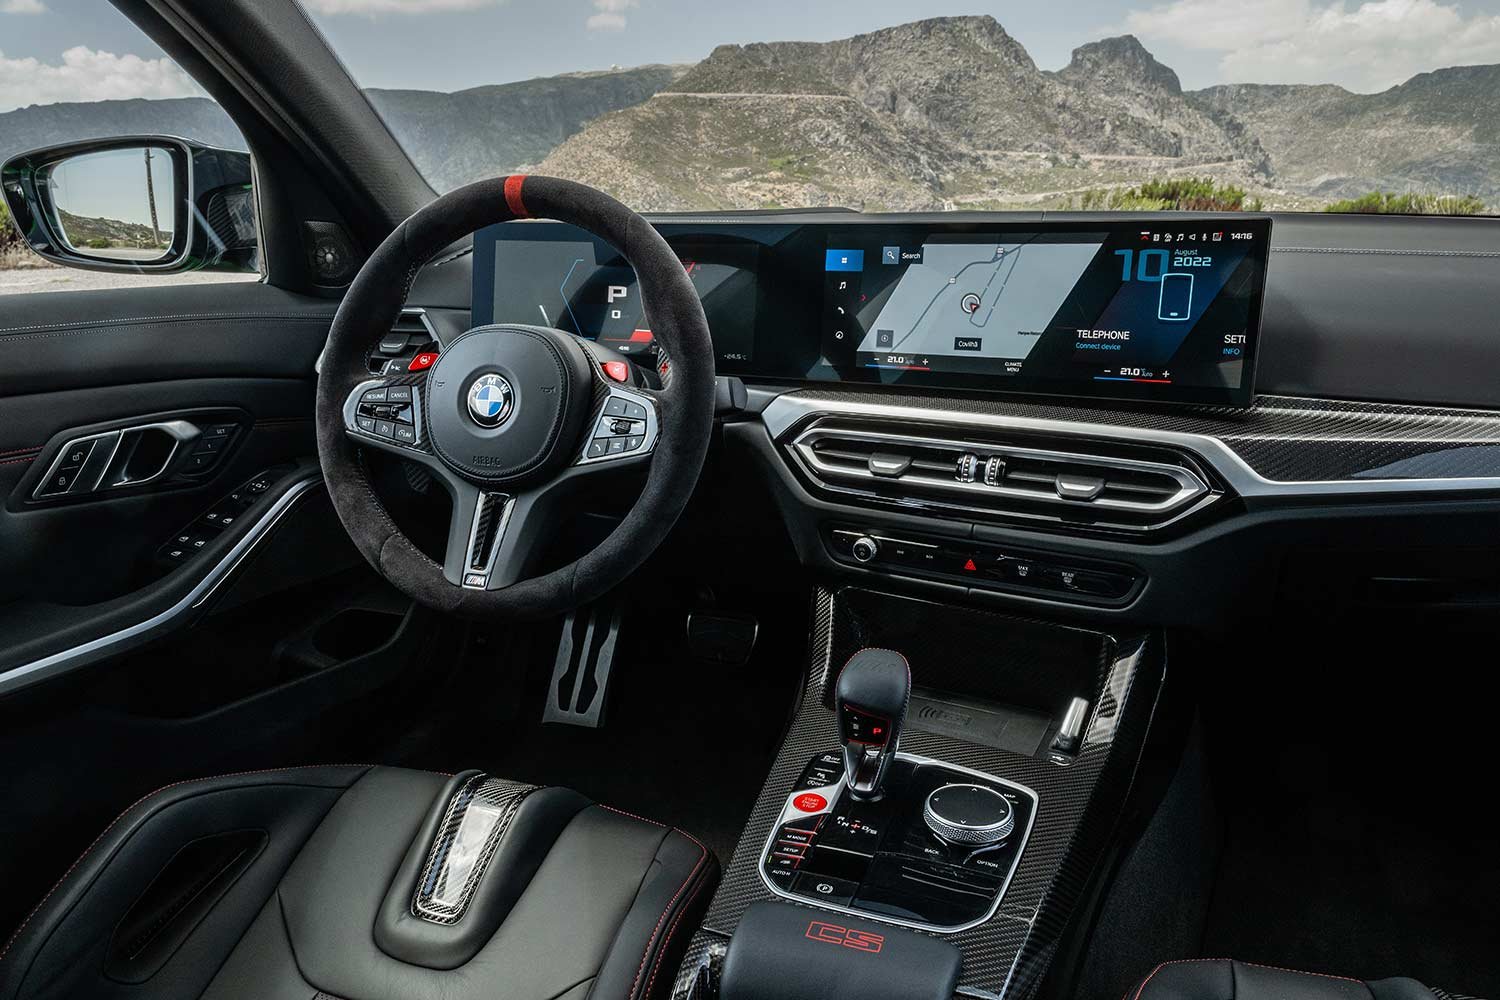 The allnew BMW M3 CS is here to enthrall over every mile on the road